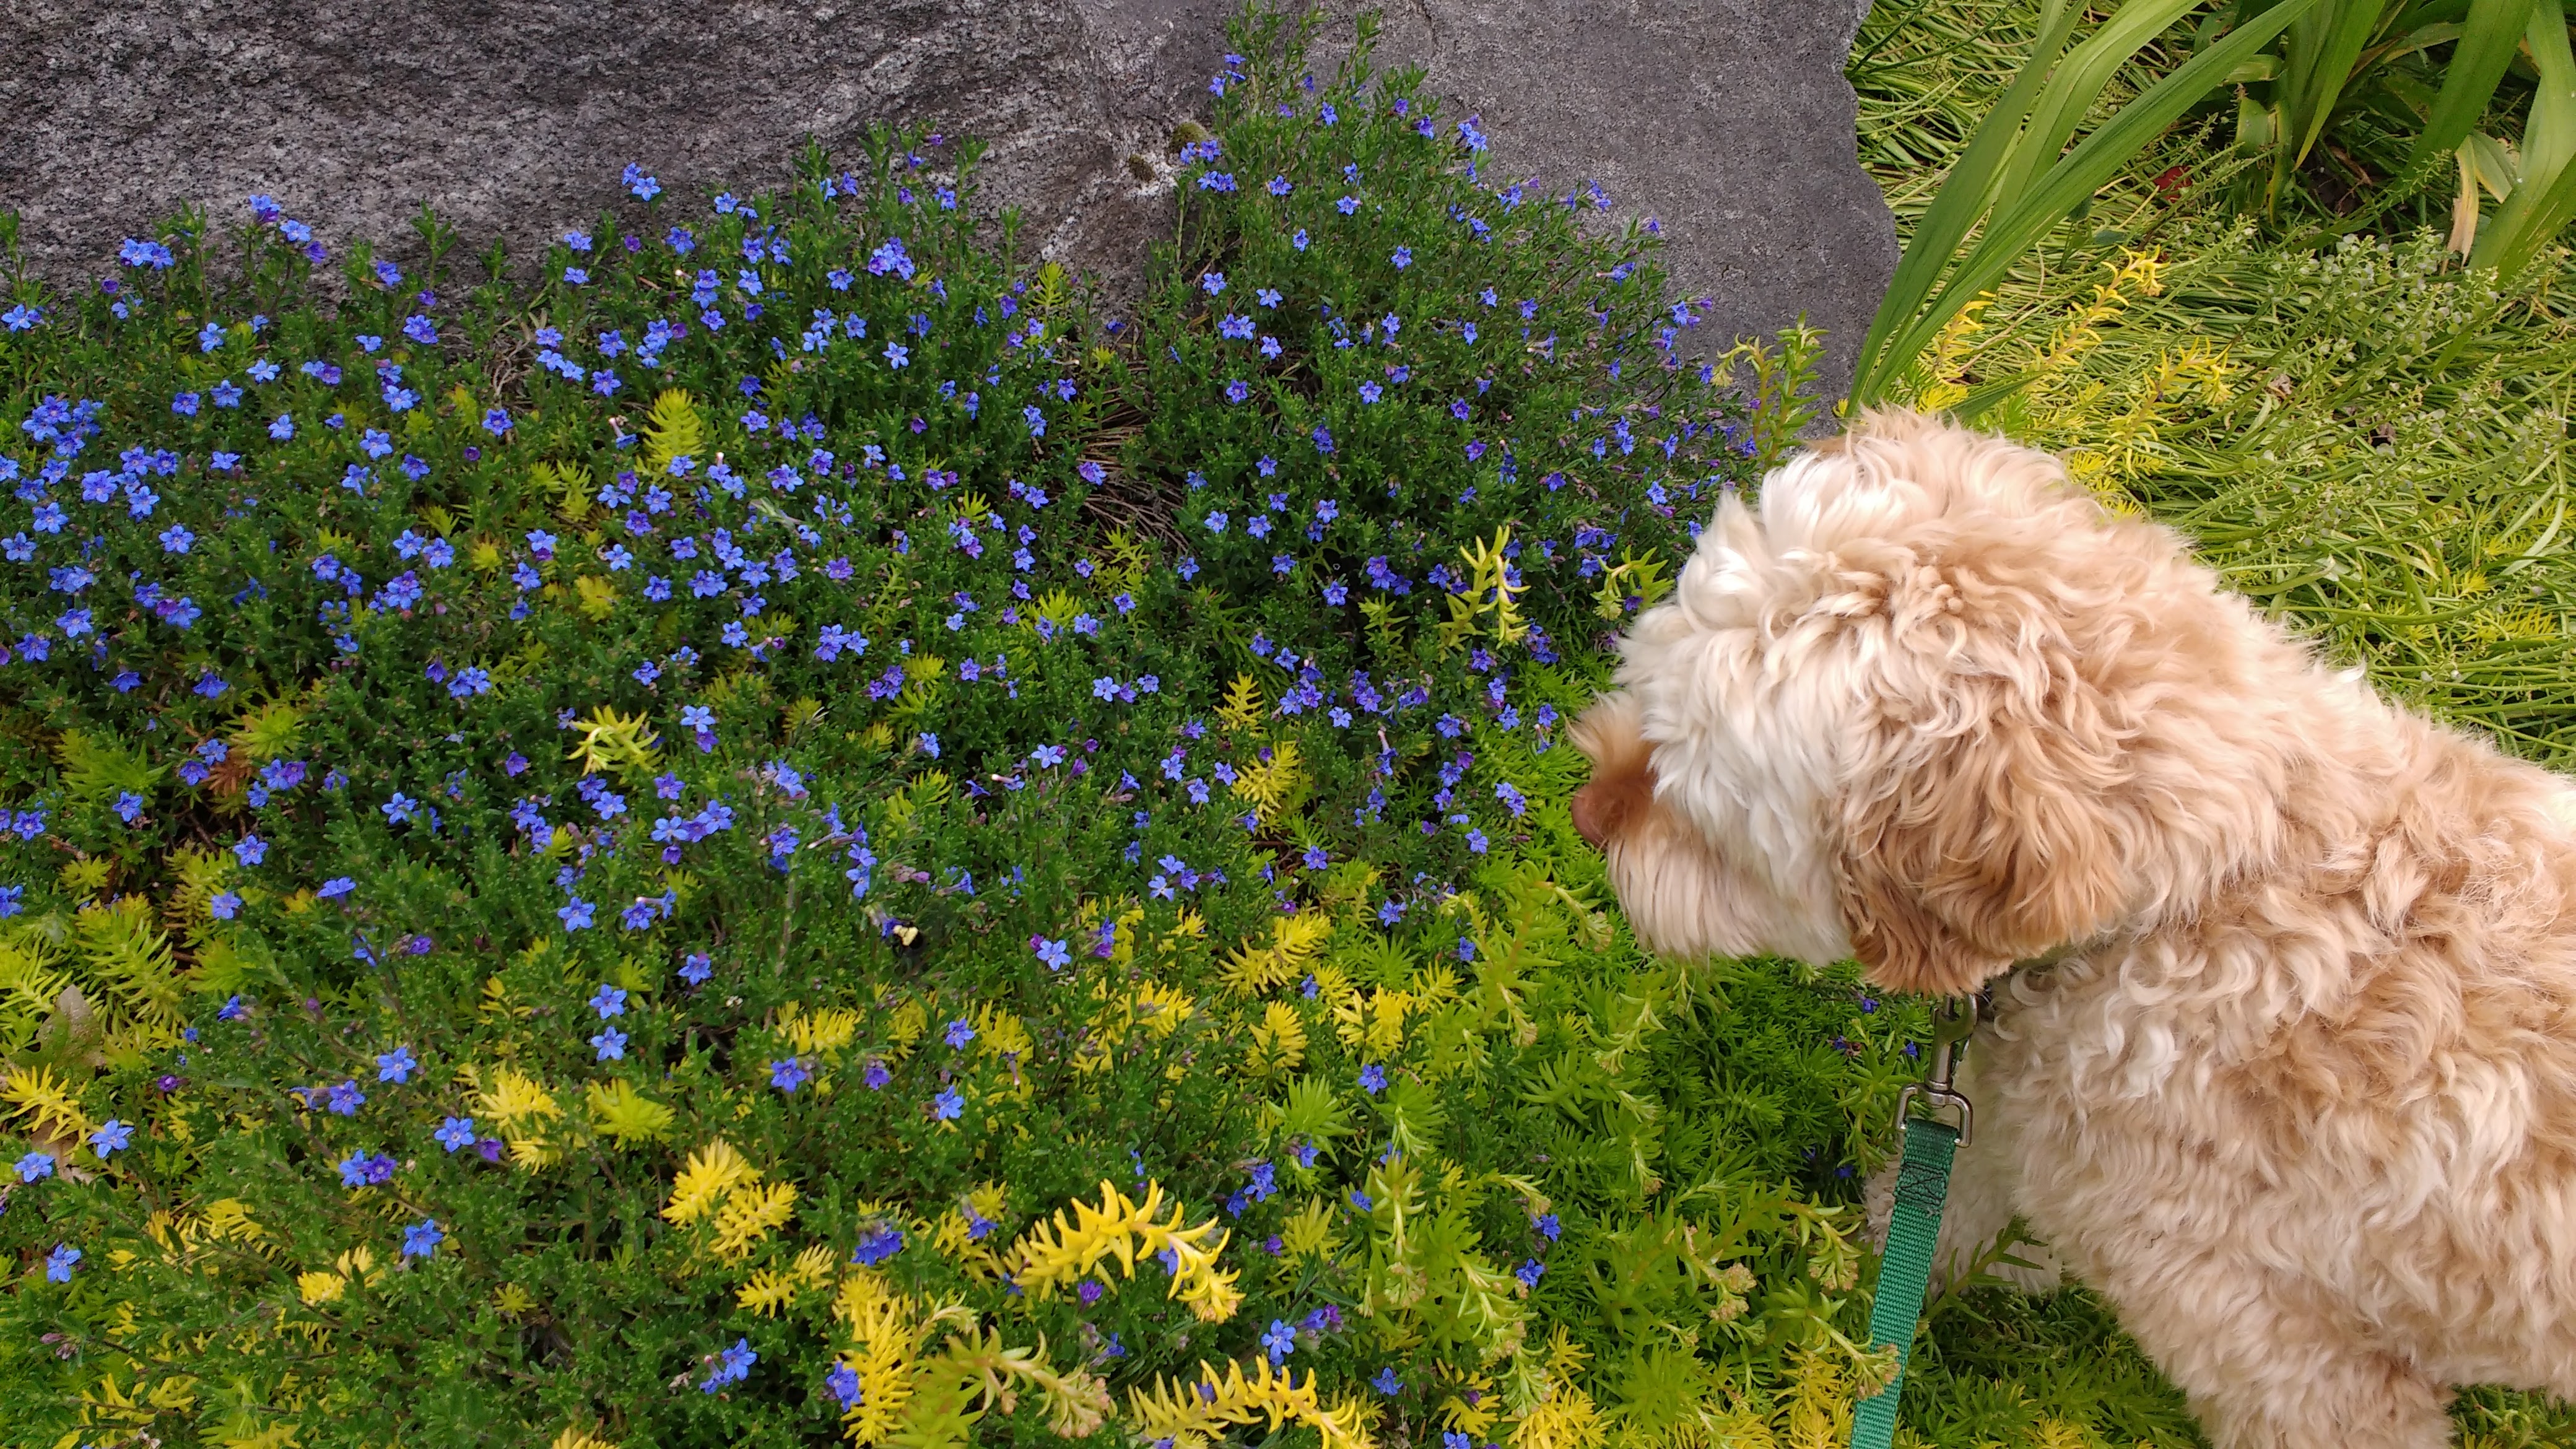 Hachi looking at blooming plants on a walk.